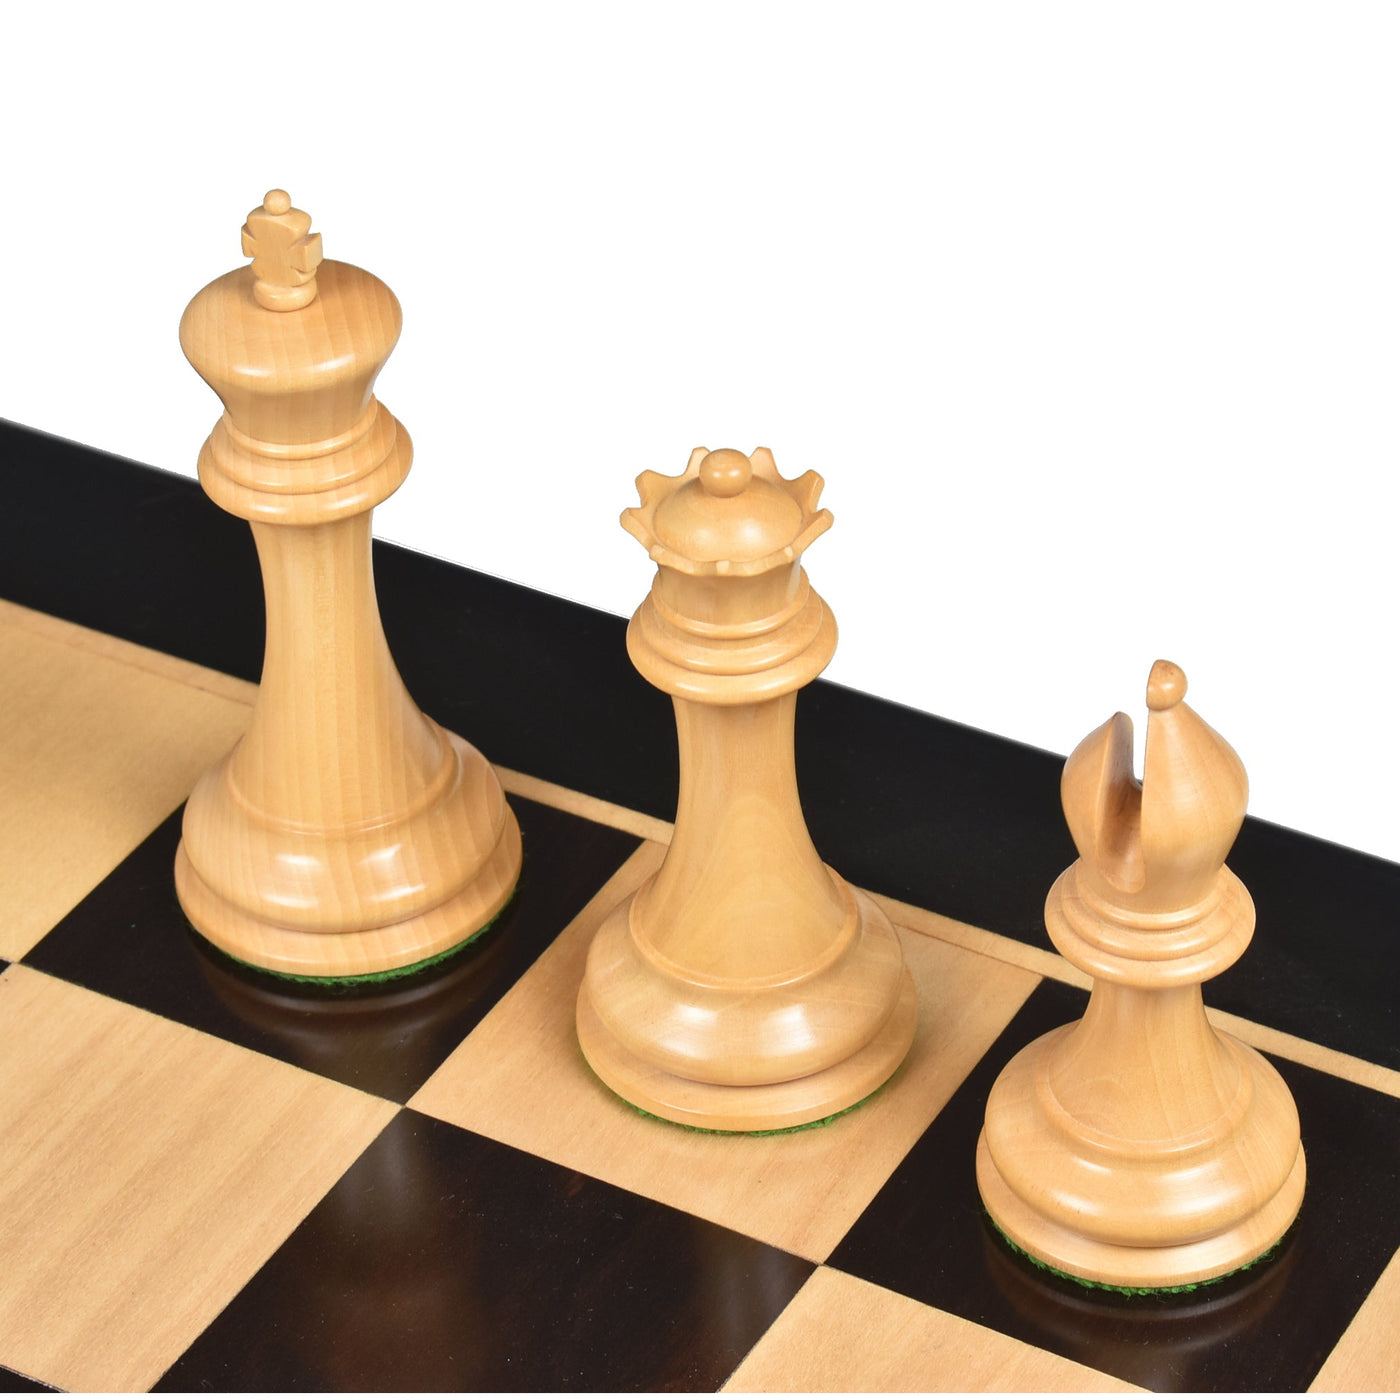 Repro 2016 Sinquefield Staunton Chess Pieces Only Set